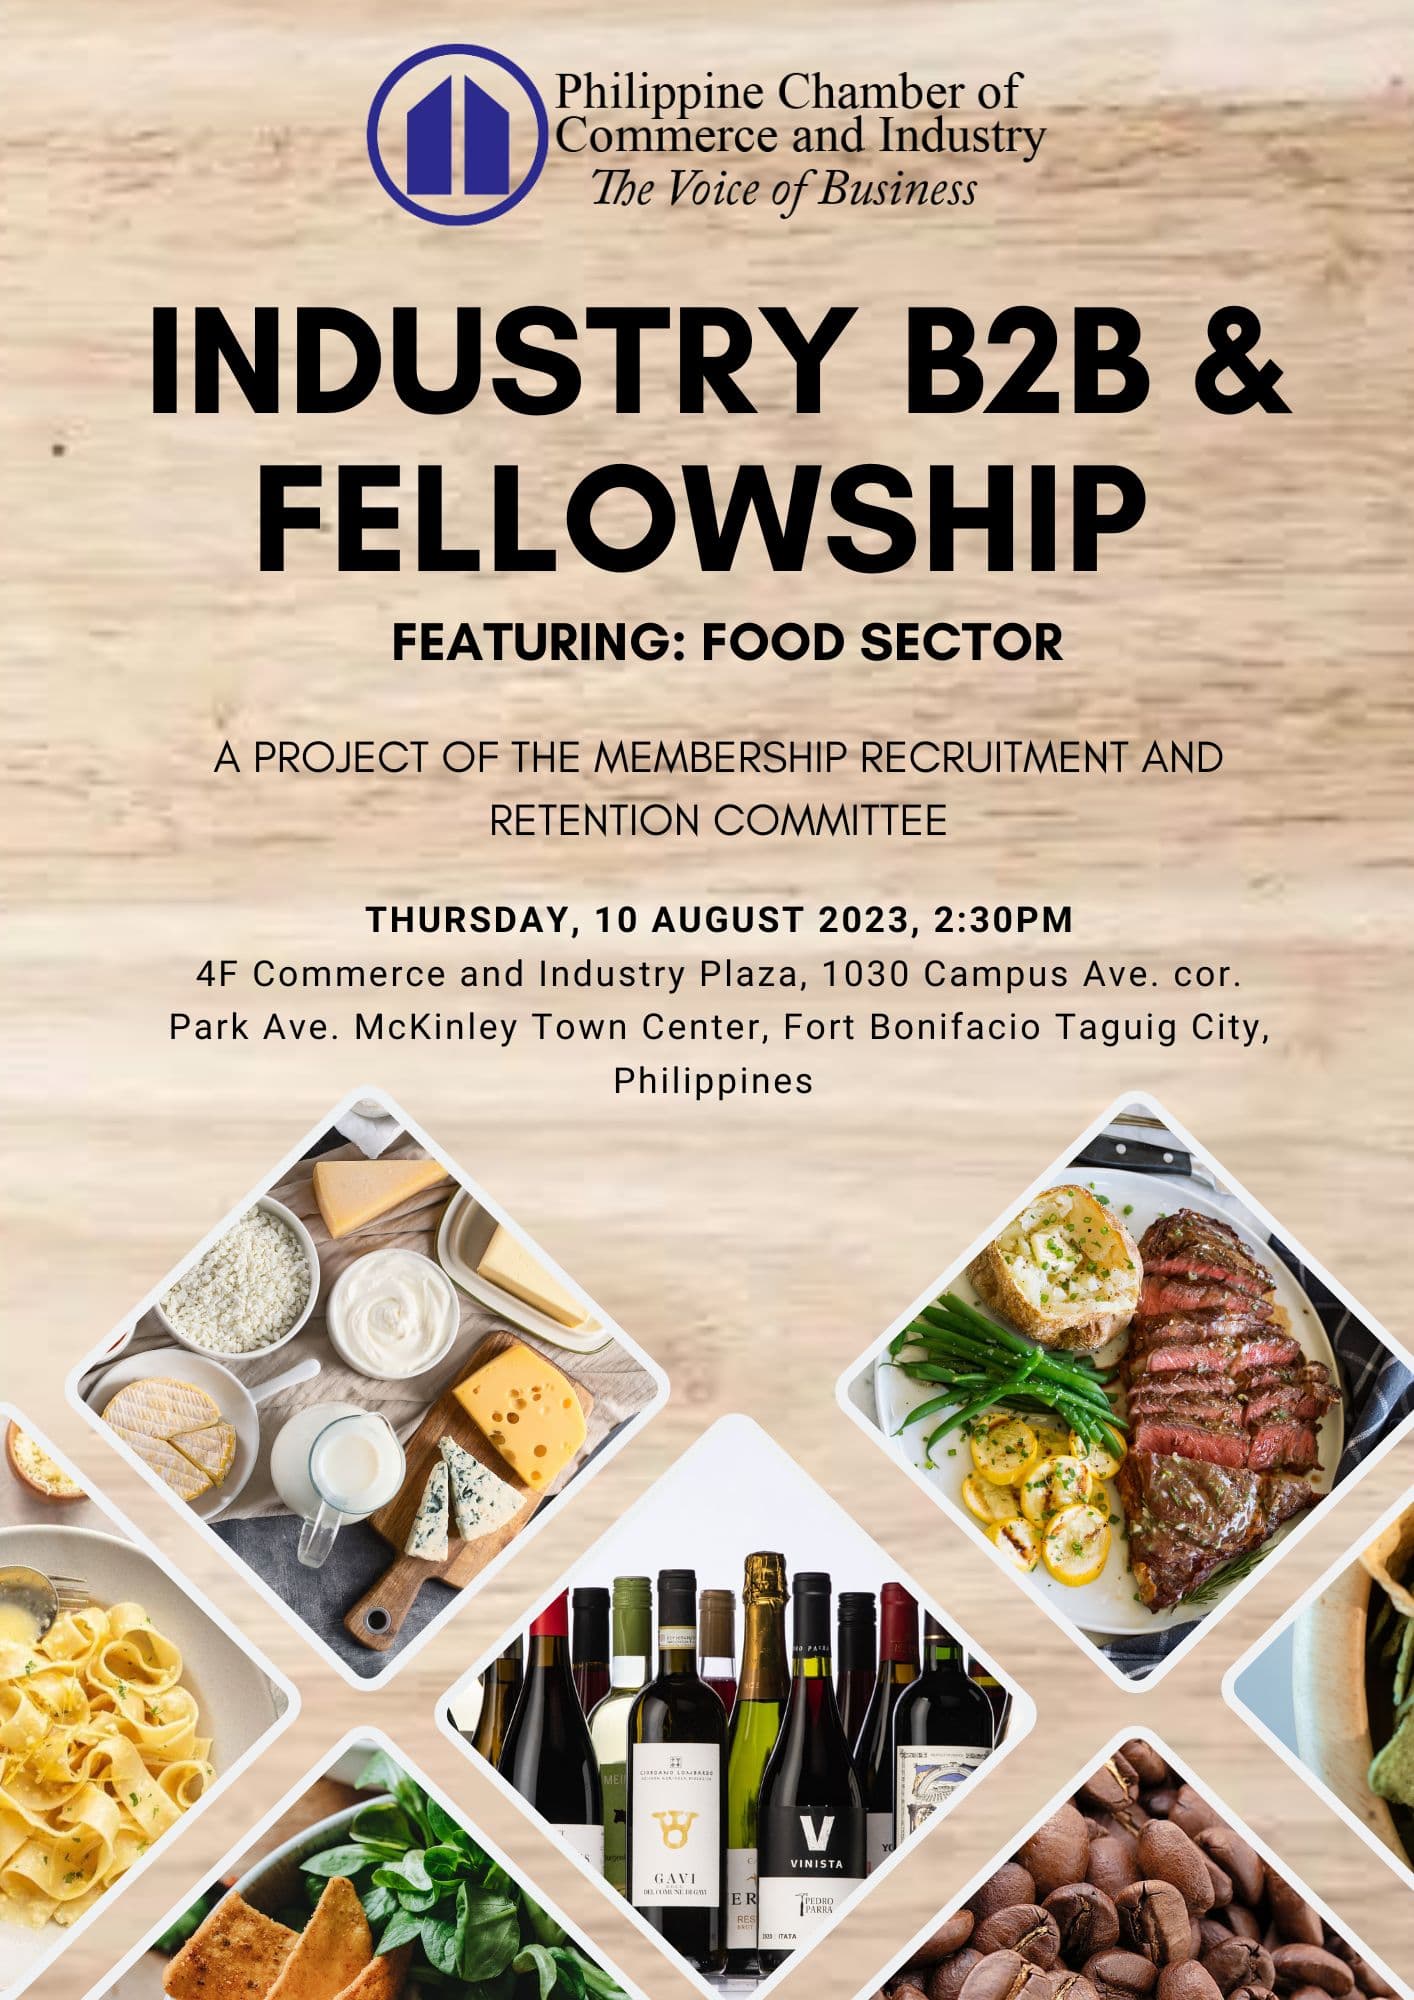 Industry B2B and Fellowship on real estate and construction